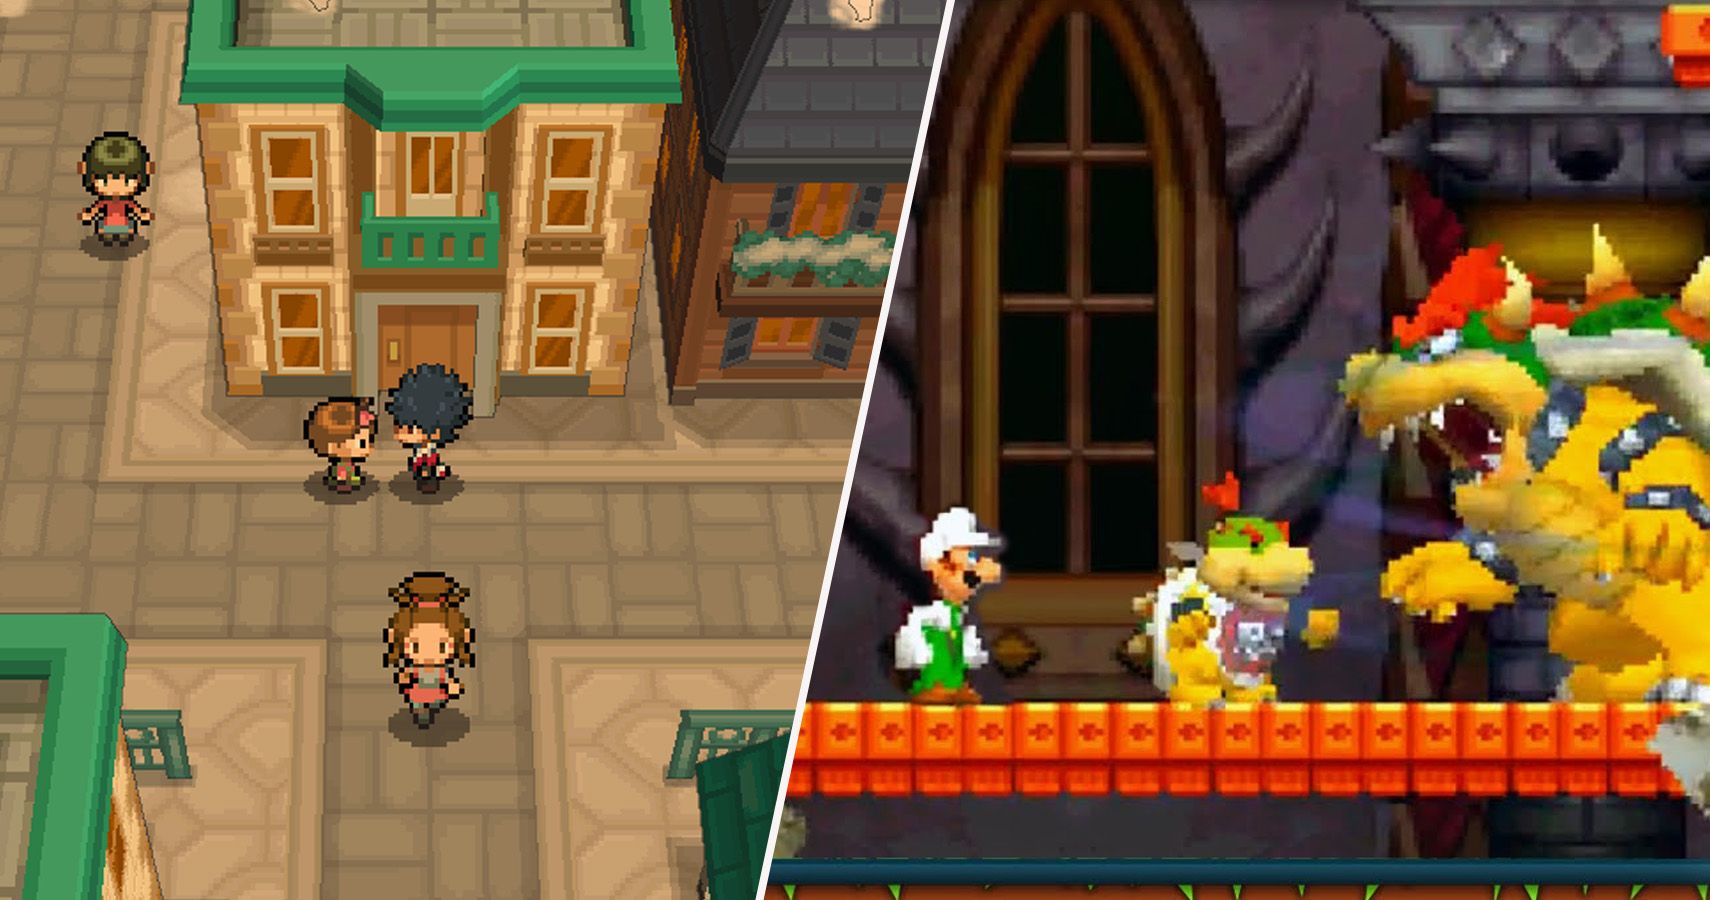 15 Nintendo Ds Games That Are Totally Overrated And 15 That Are Worth A Second Look